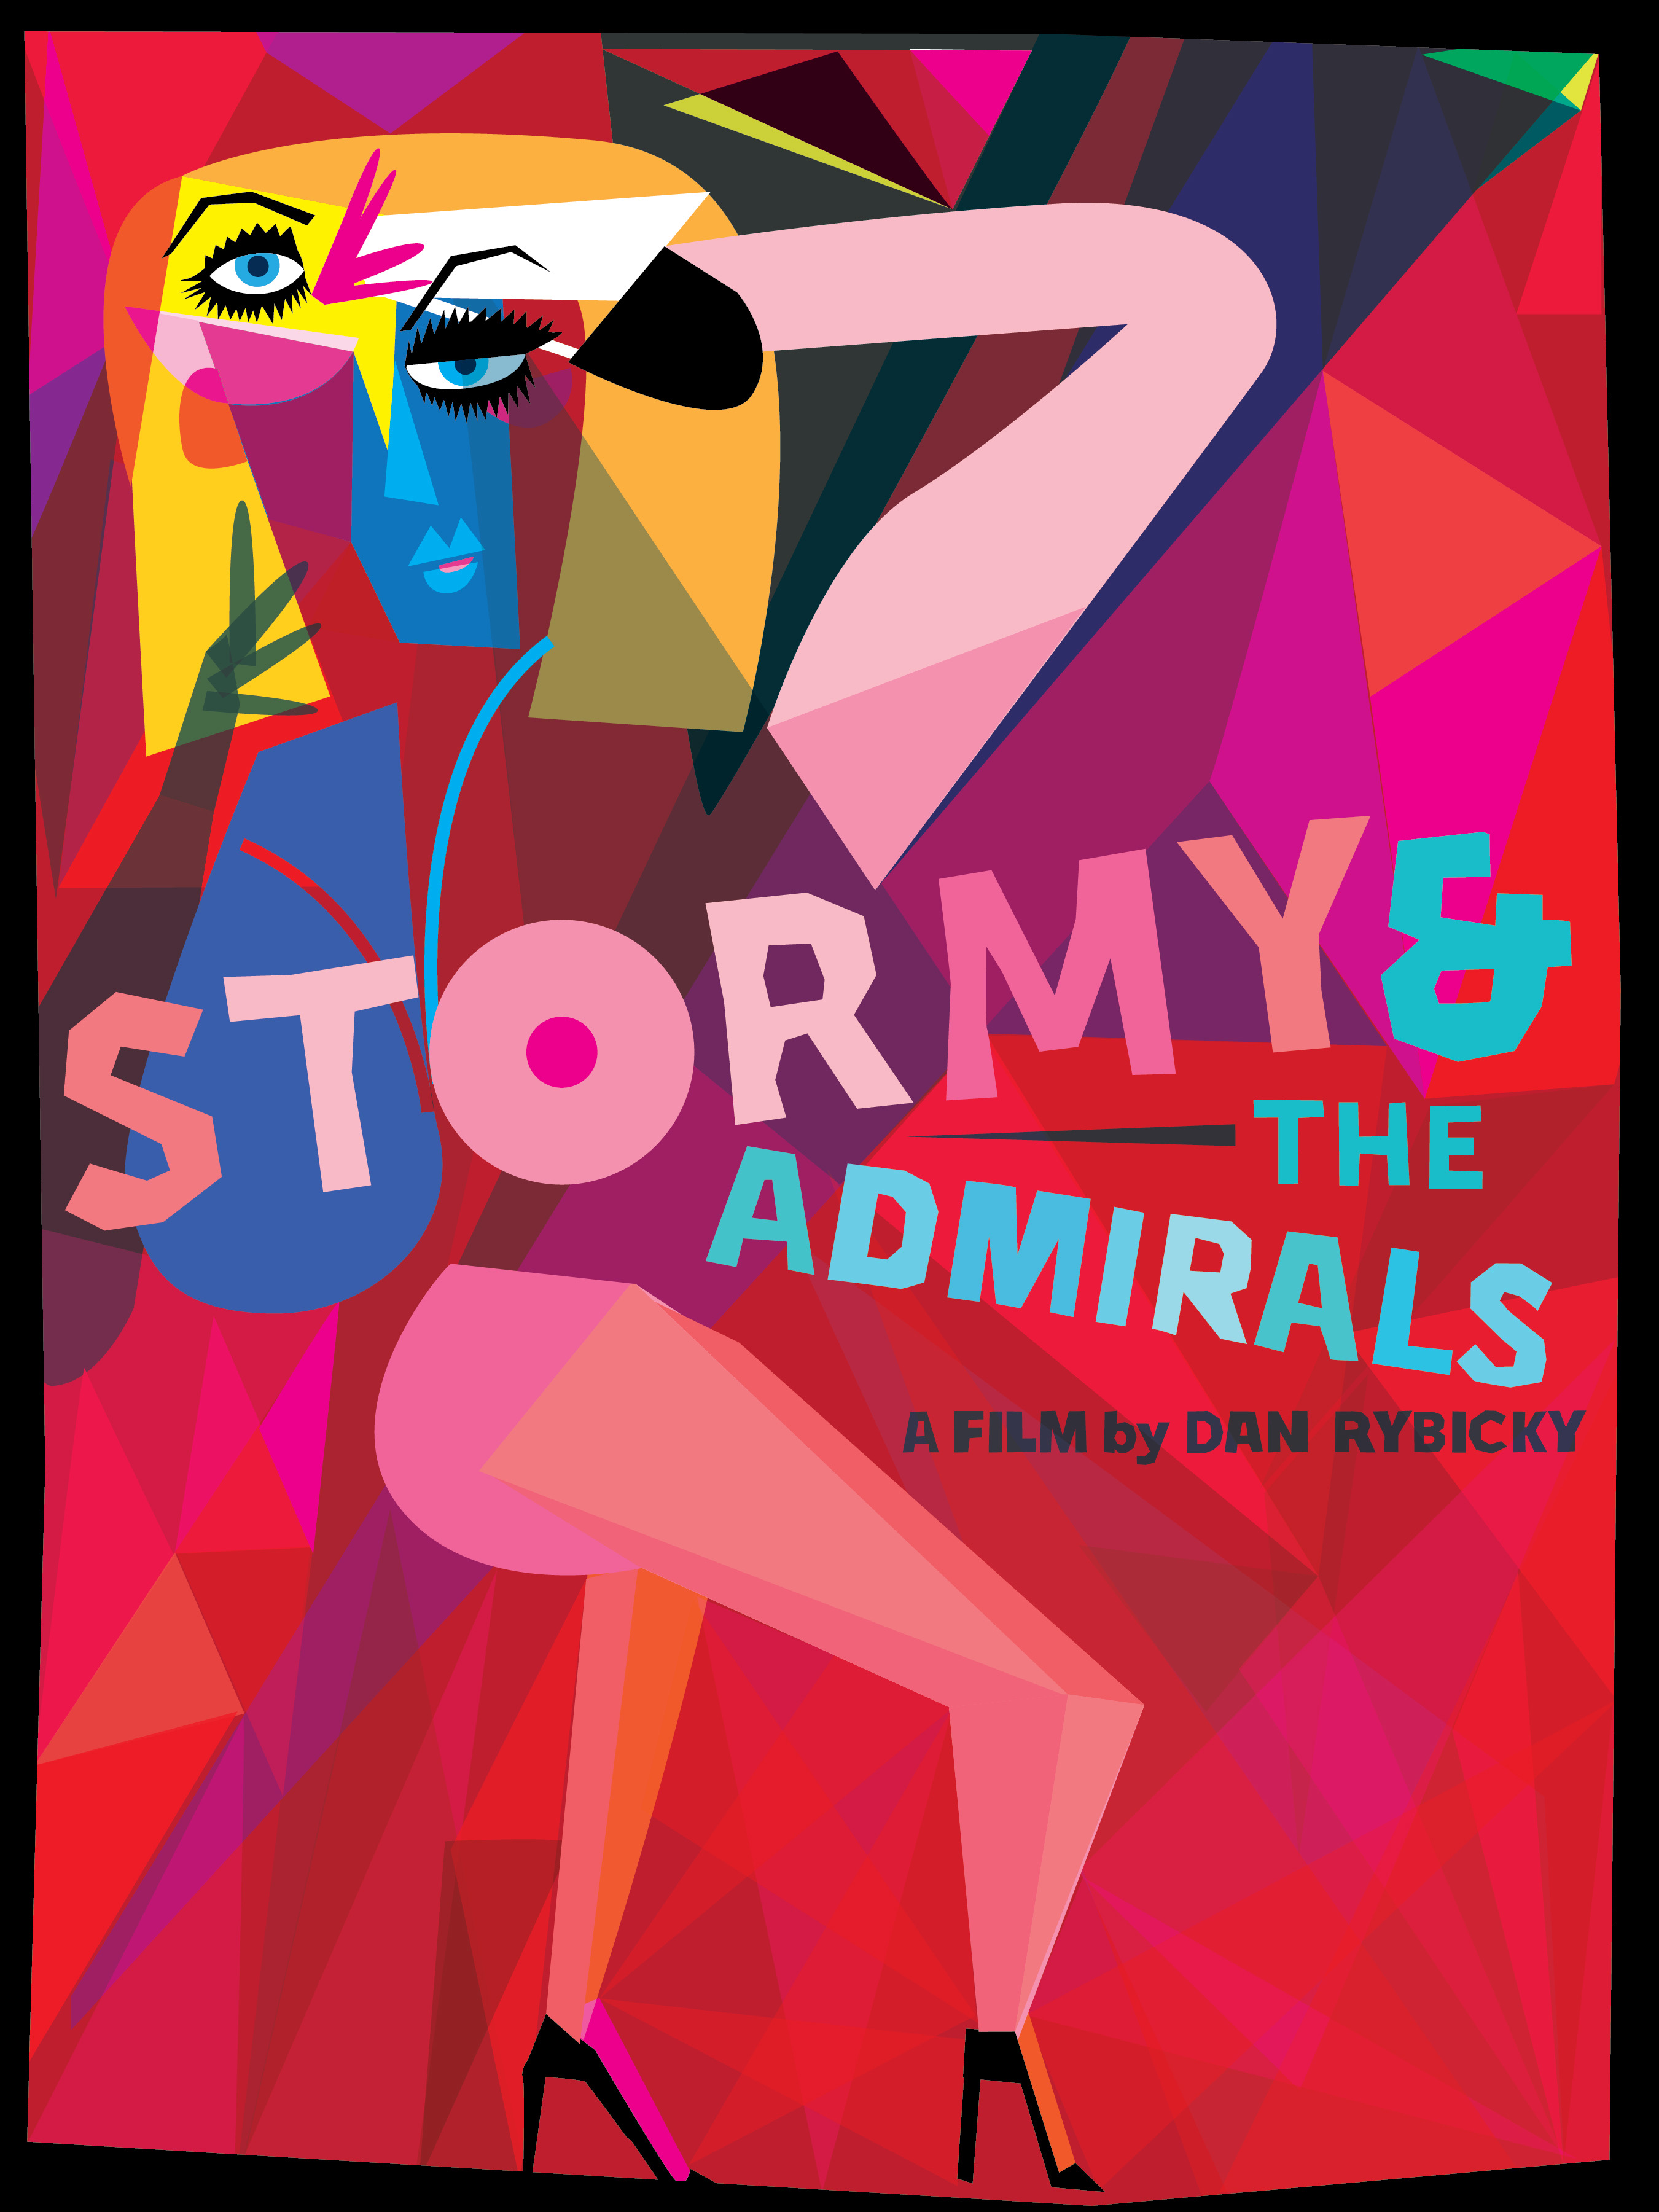 Stormy and the Admirals (2020)